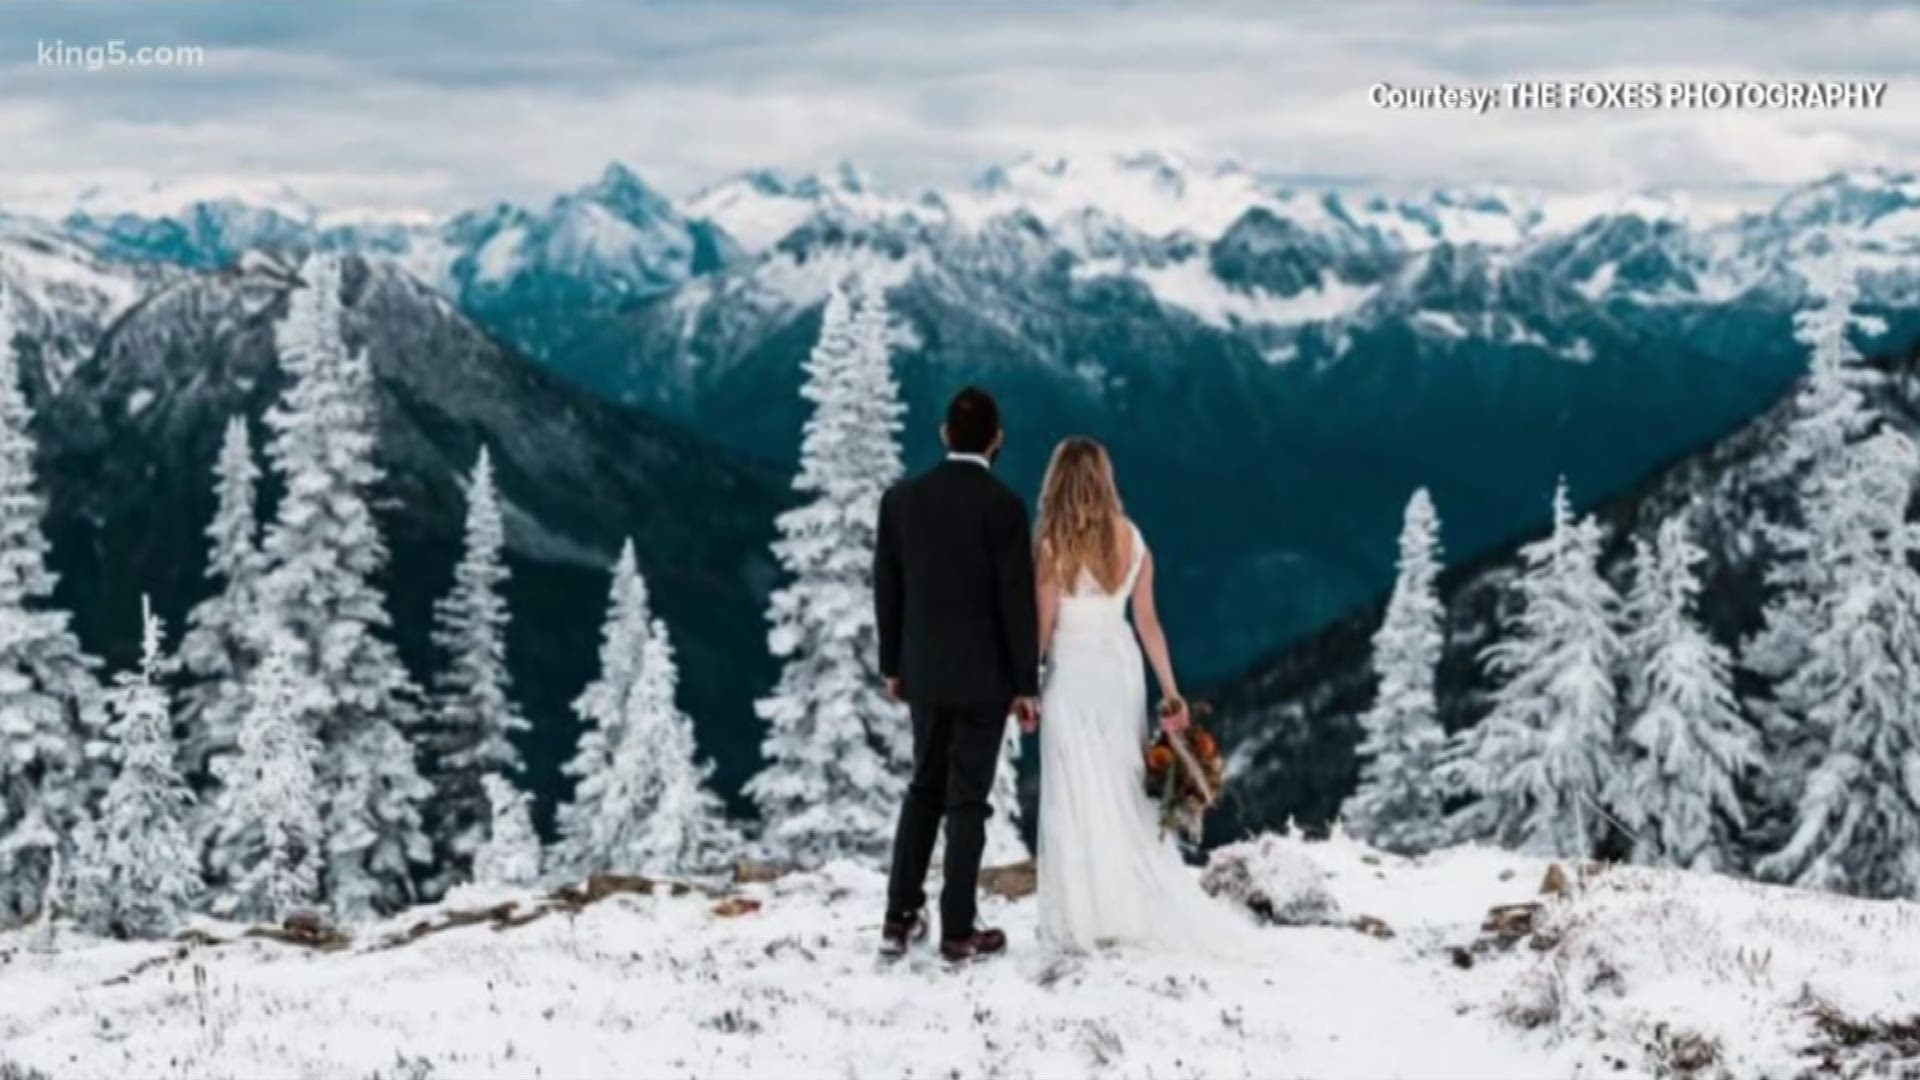 Dan and Emily hiked into the North Cascades mountains at the end of September expecting to find fall foliage, but were greeted by a winter wonderland instead.